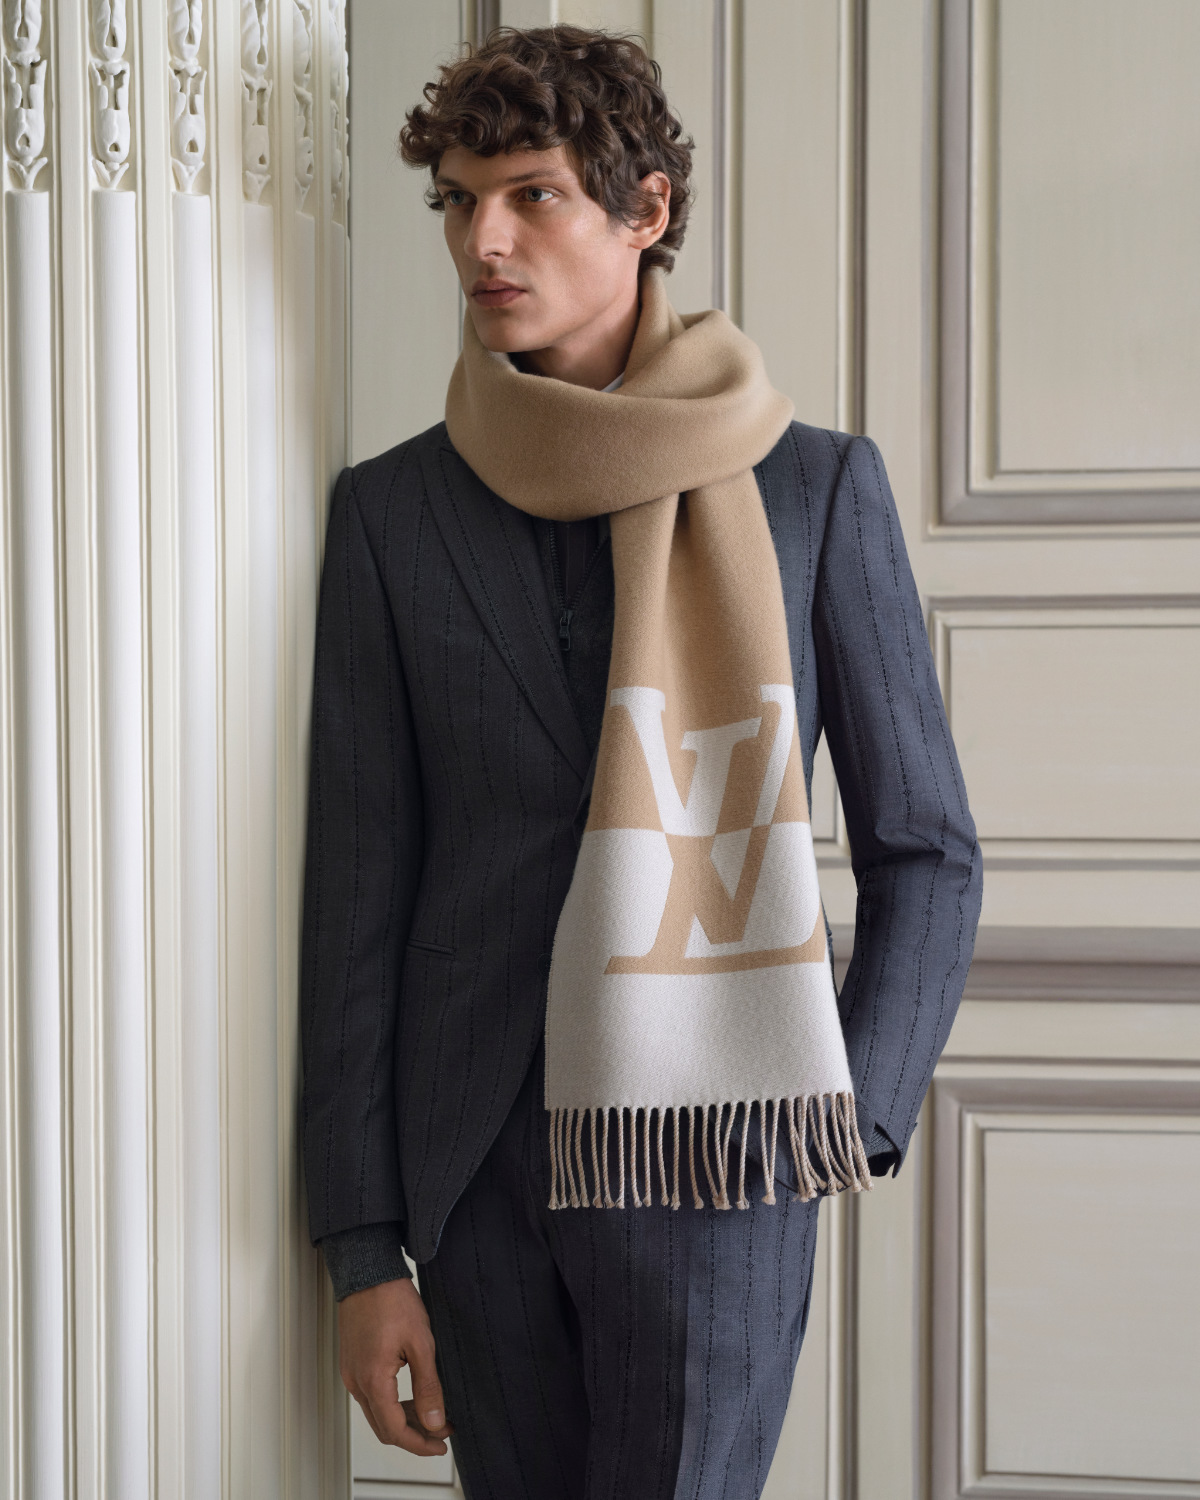 Carlos Alcaraz is the Face of Louis Vuitton Formal Collection